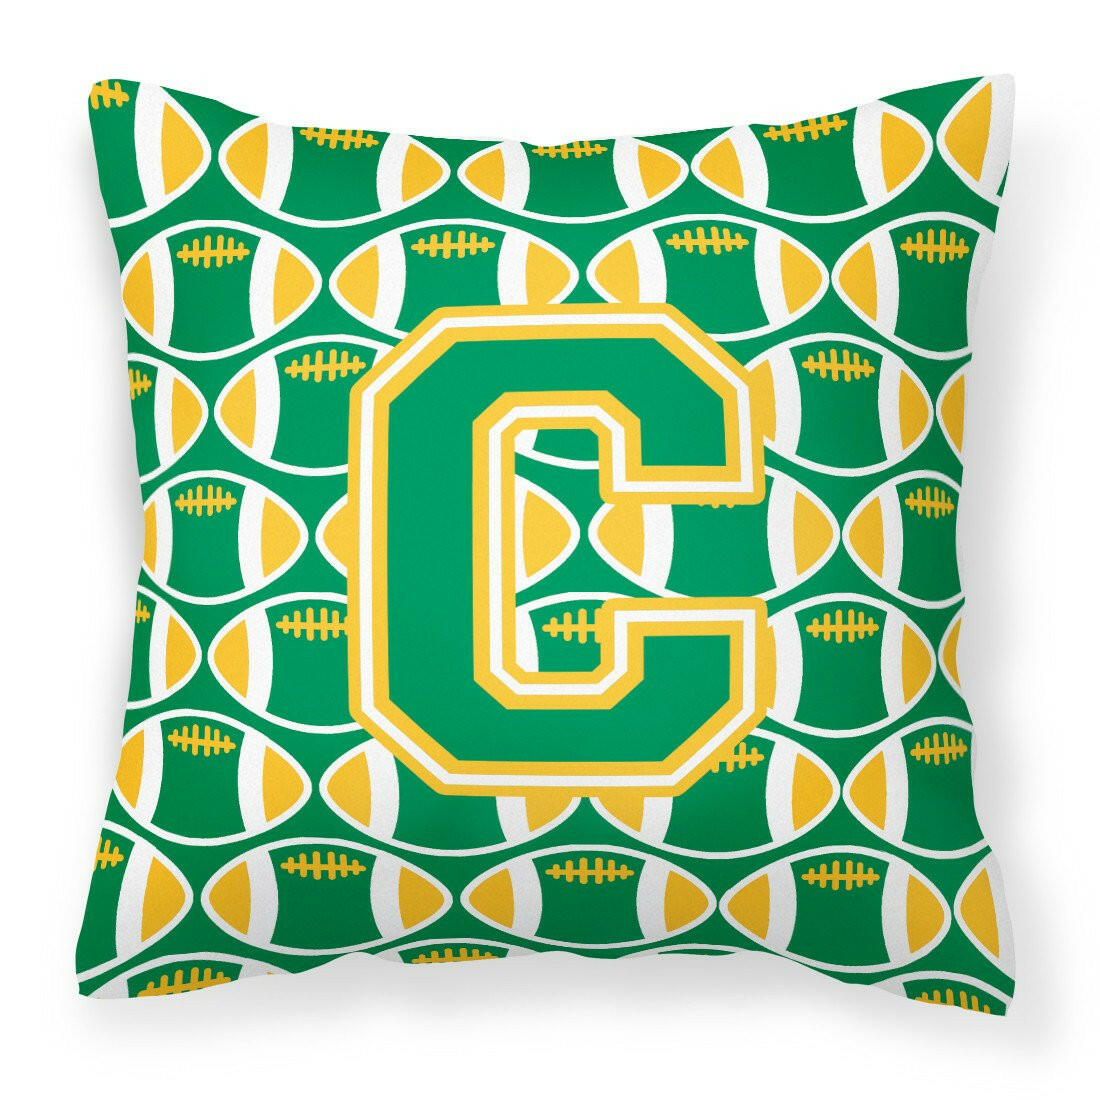 Letter C Football Green and Gold Fabric Decorative Pillow CJ1069-CPW1414 by Caroline's Treasures